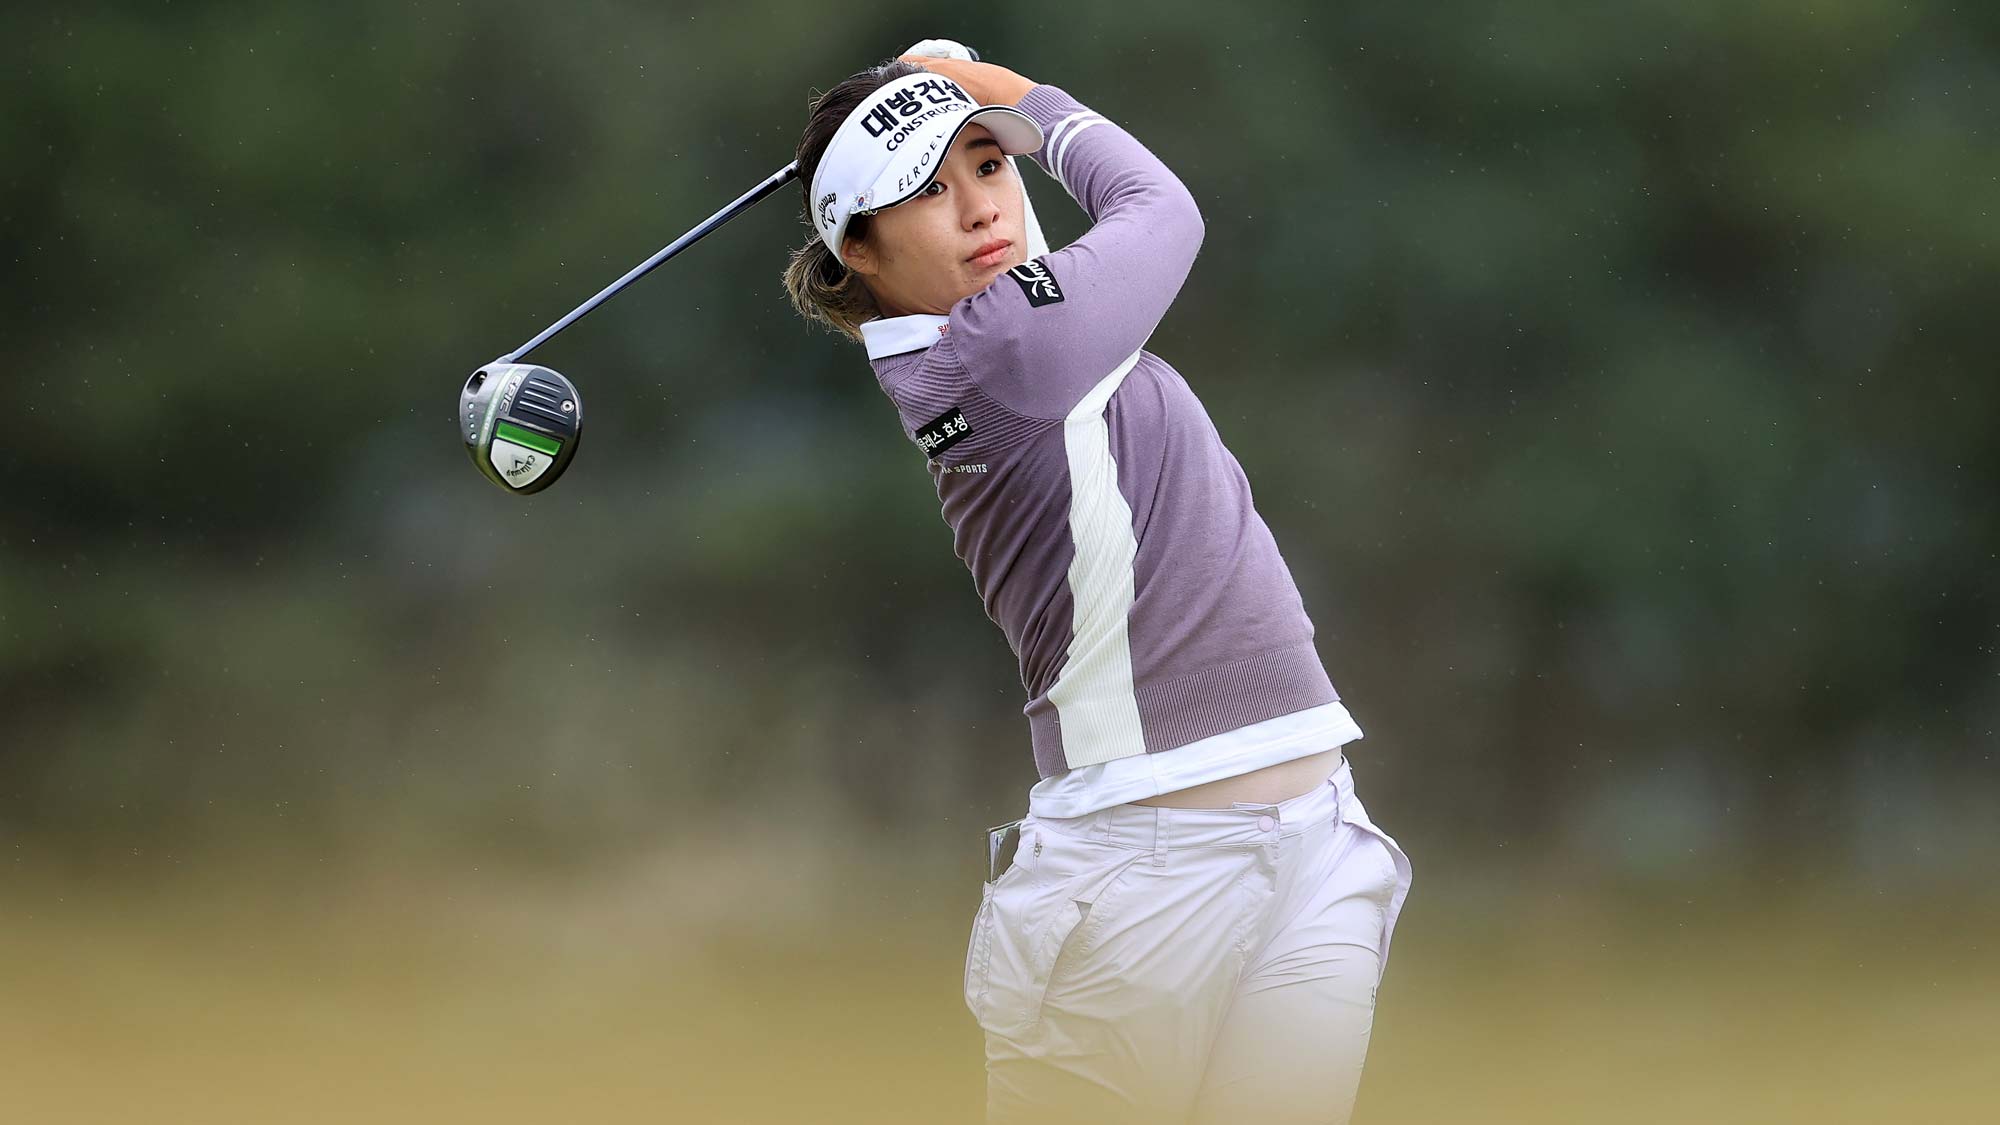 Jeongeun Lee6 of South Korea plays her tee shot on the first hole during the second round of the Trust Golf Scottish Women's Open